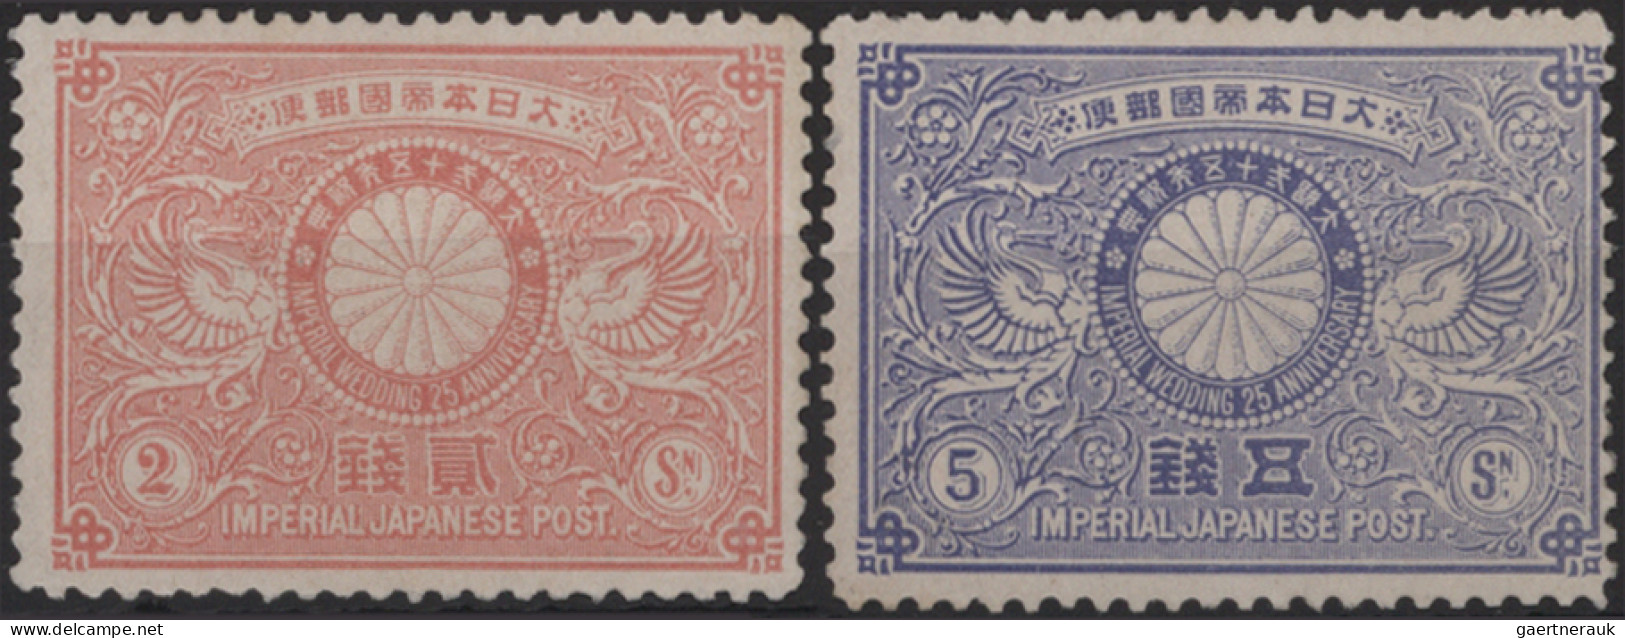 Japan: 1894/1942, dealer stock of pre-WWII commemorative issues in approx. 98 pl